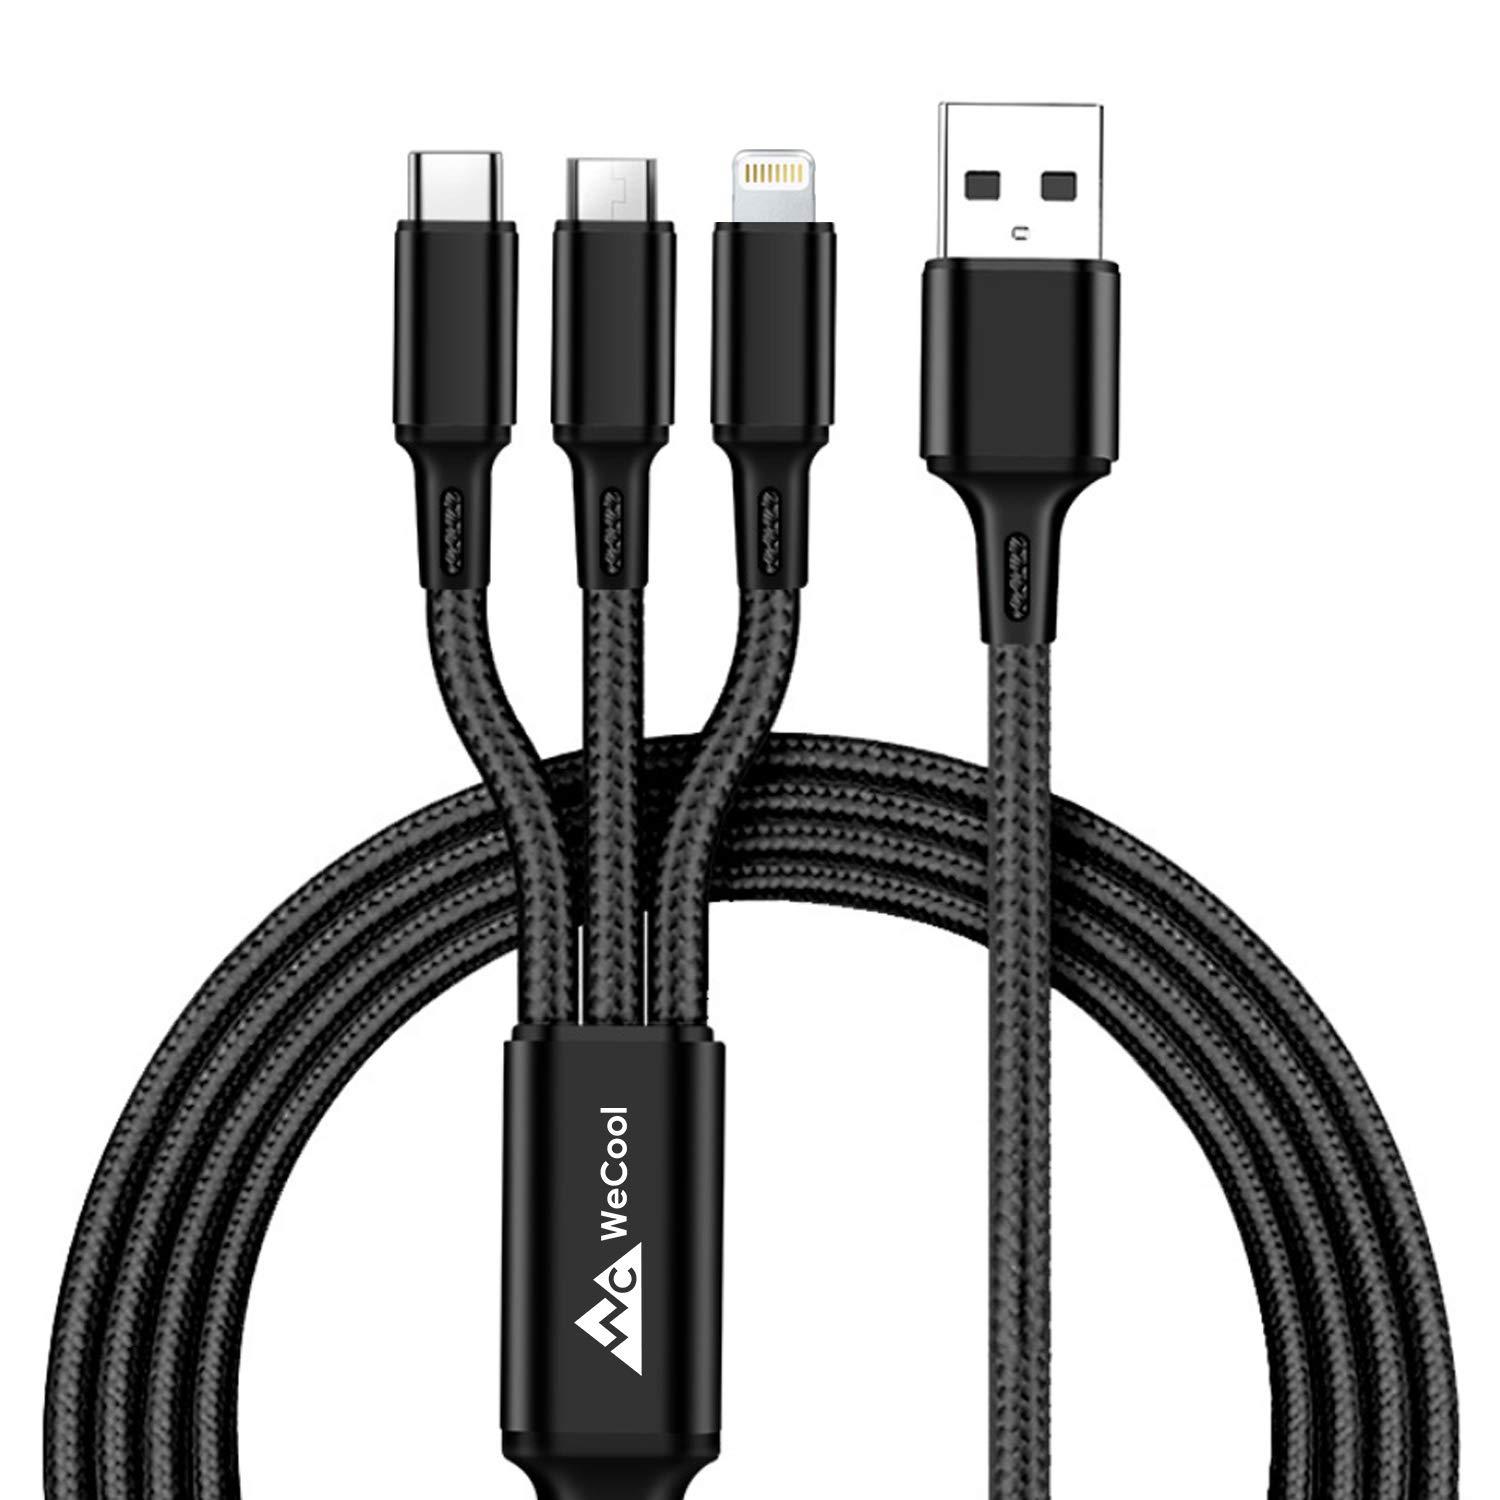 Wecool Nylon Braided Multifunction Fast Charging Cable For Android Smartphone, And Type C Usb Devices, 3 In 1 Charging Cable, 3A, Feet) (Black) - EASYCART